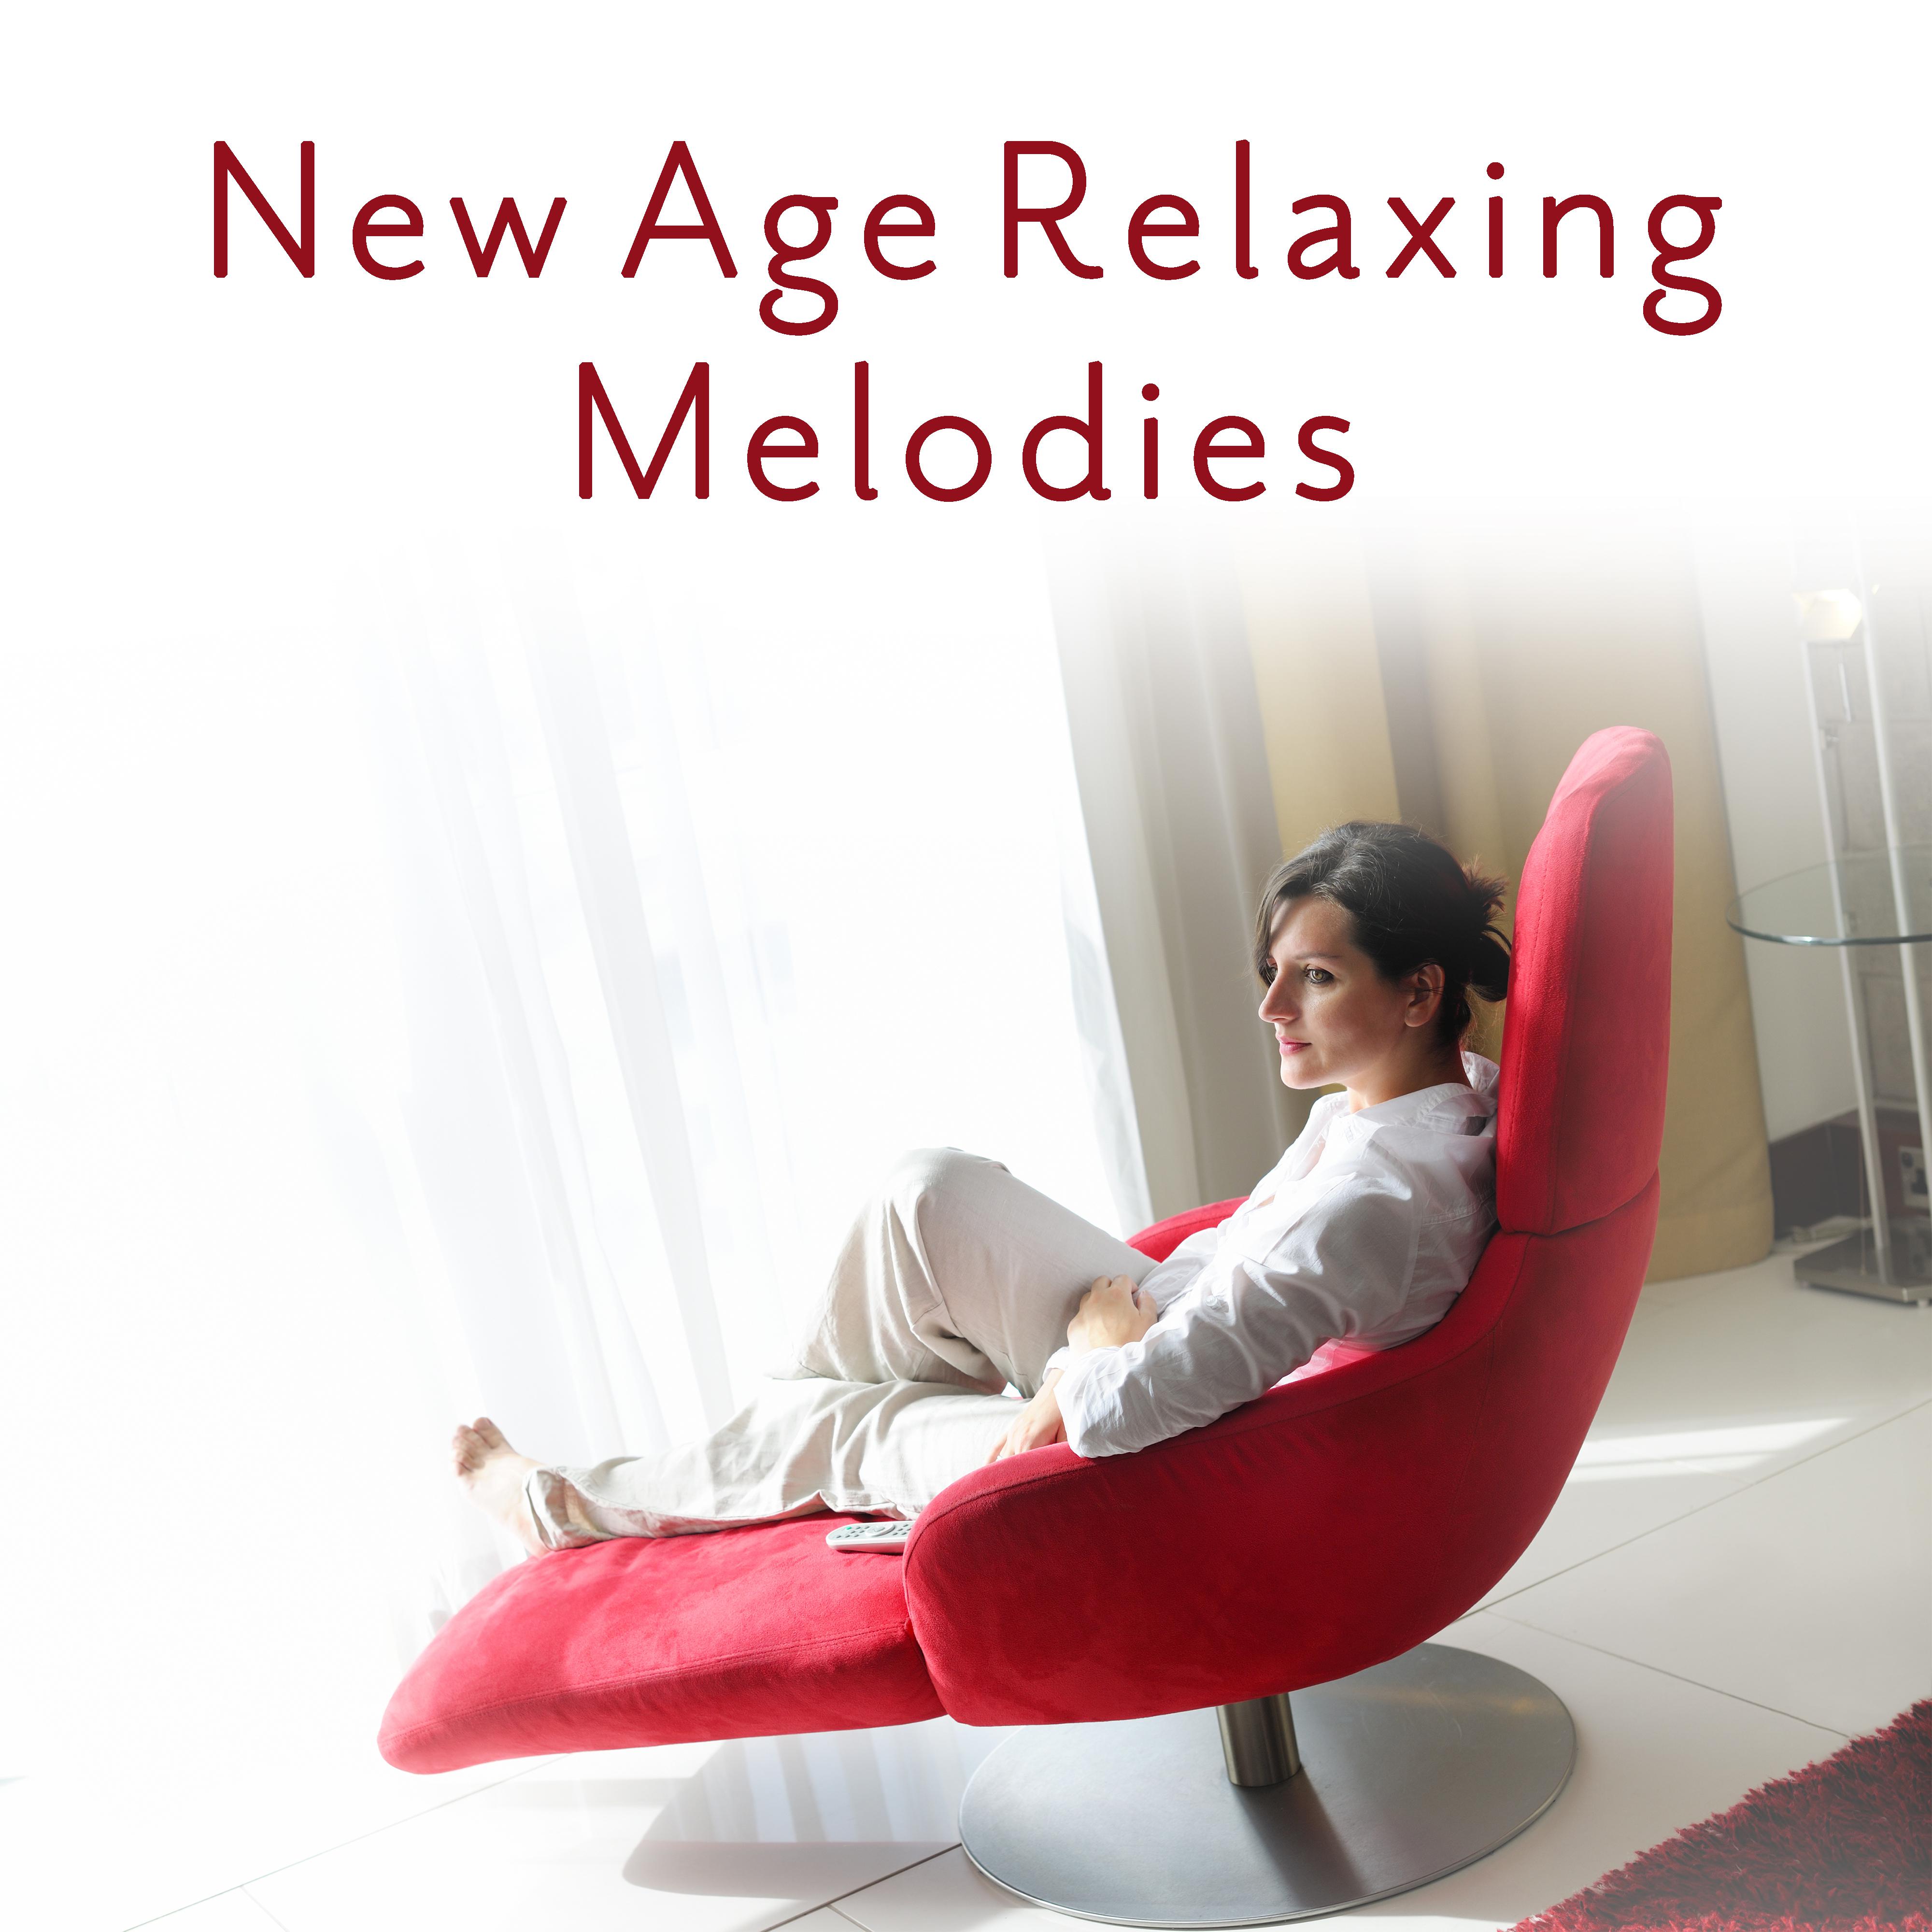 New Age Relaxing Melodies